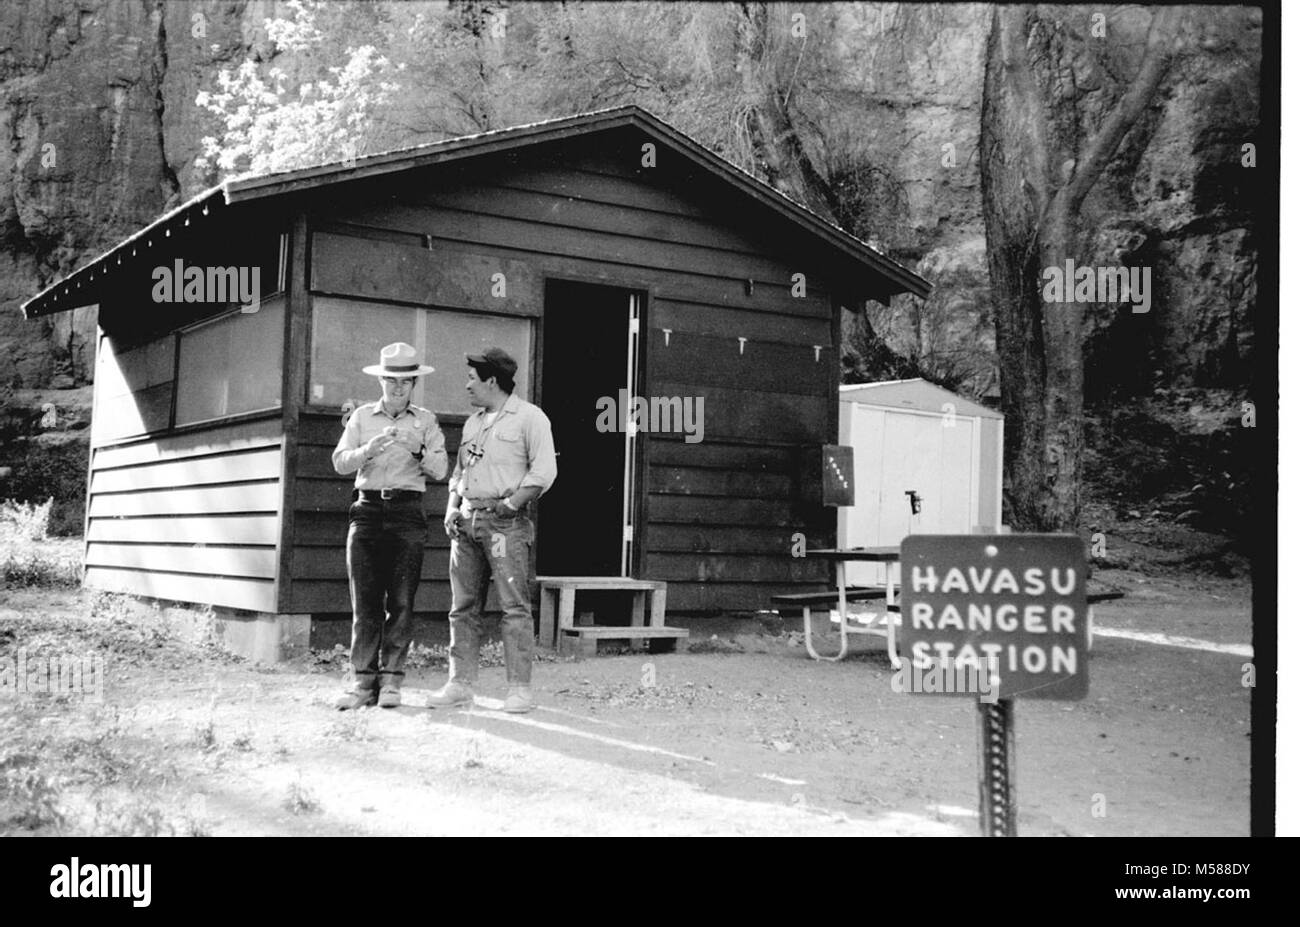 Grand Canyon Historic. ANGLO & SUPAI RANGERS POSE IN FRONT OF RANGER STATION, WHEN THE CAMPGROUND AT HAVASU HAVASUPAI WHEN ADMINISTERED GRCA GRAND CANYON NATIONAL PARK, CIRCA 1977,  . Stock Photo